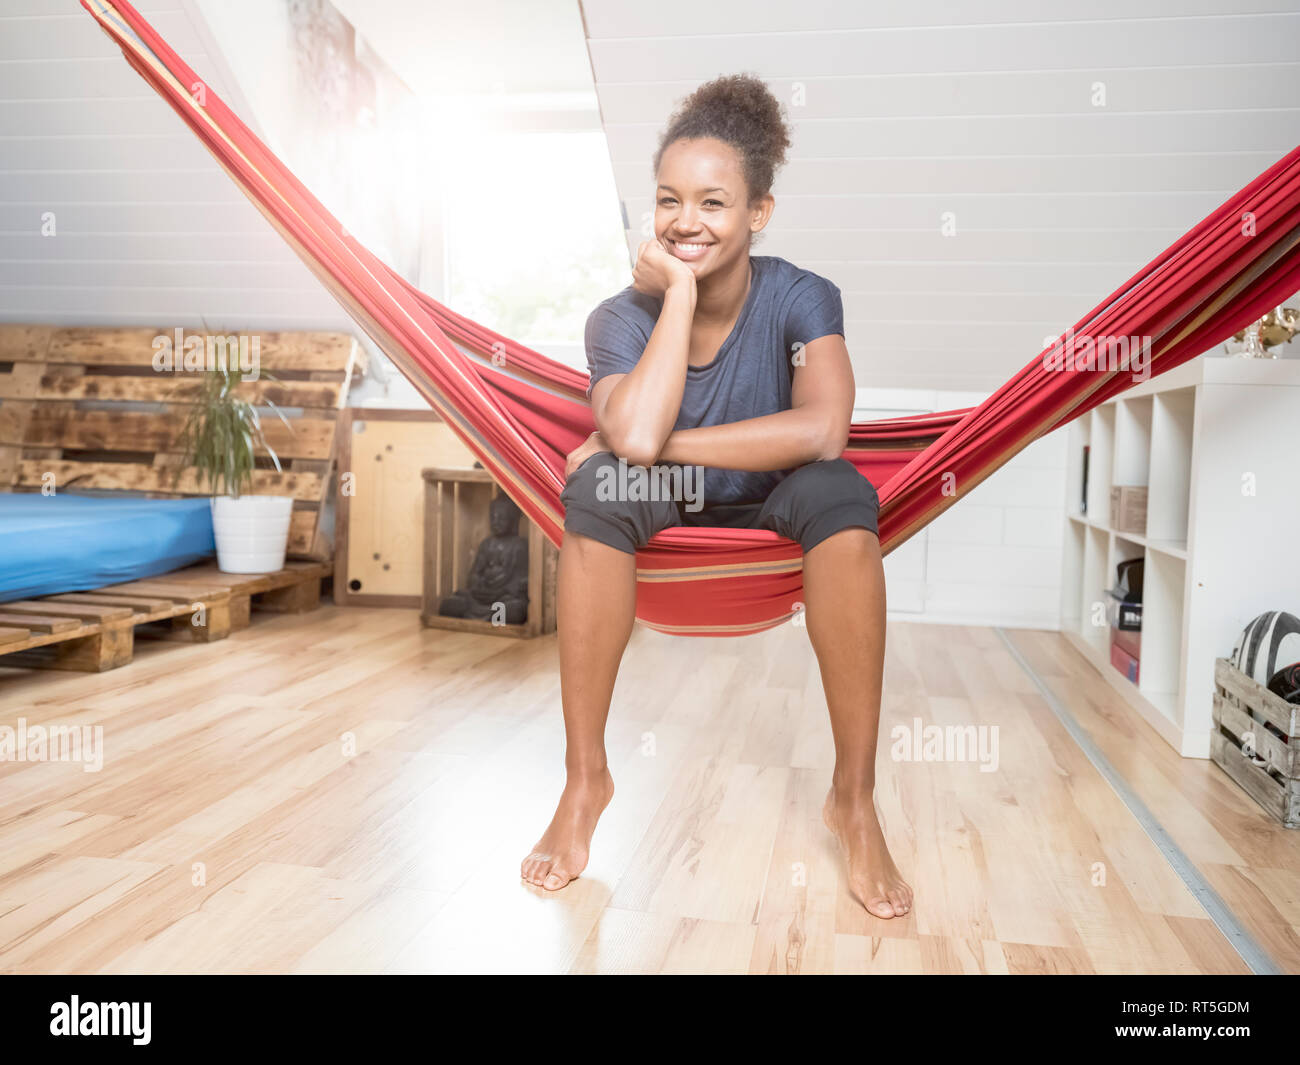 Portrait of happy young woman sitting in hammock Banque D'Images